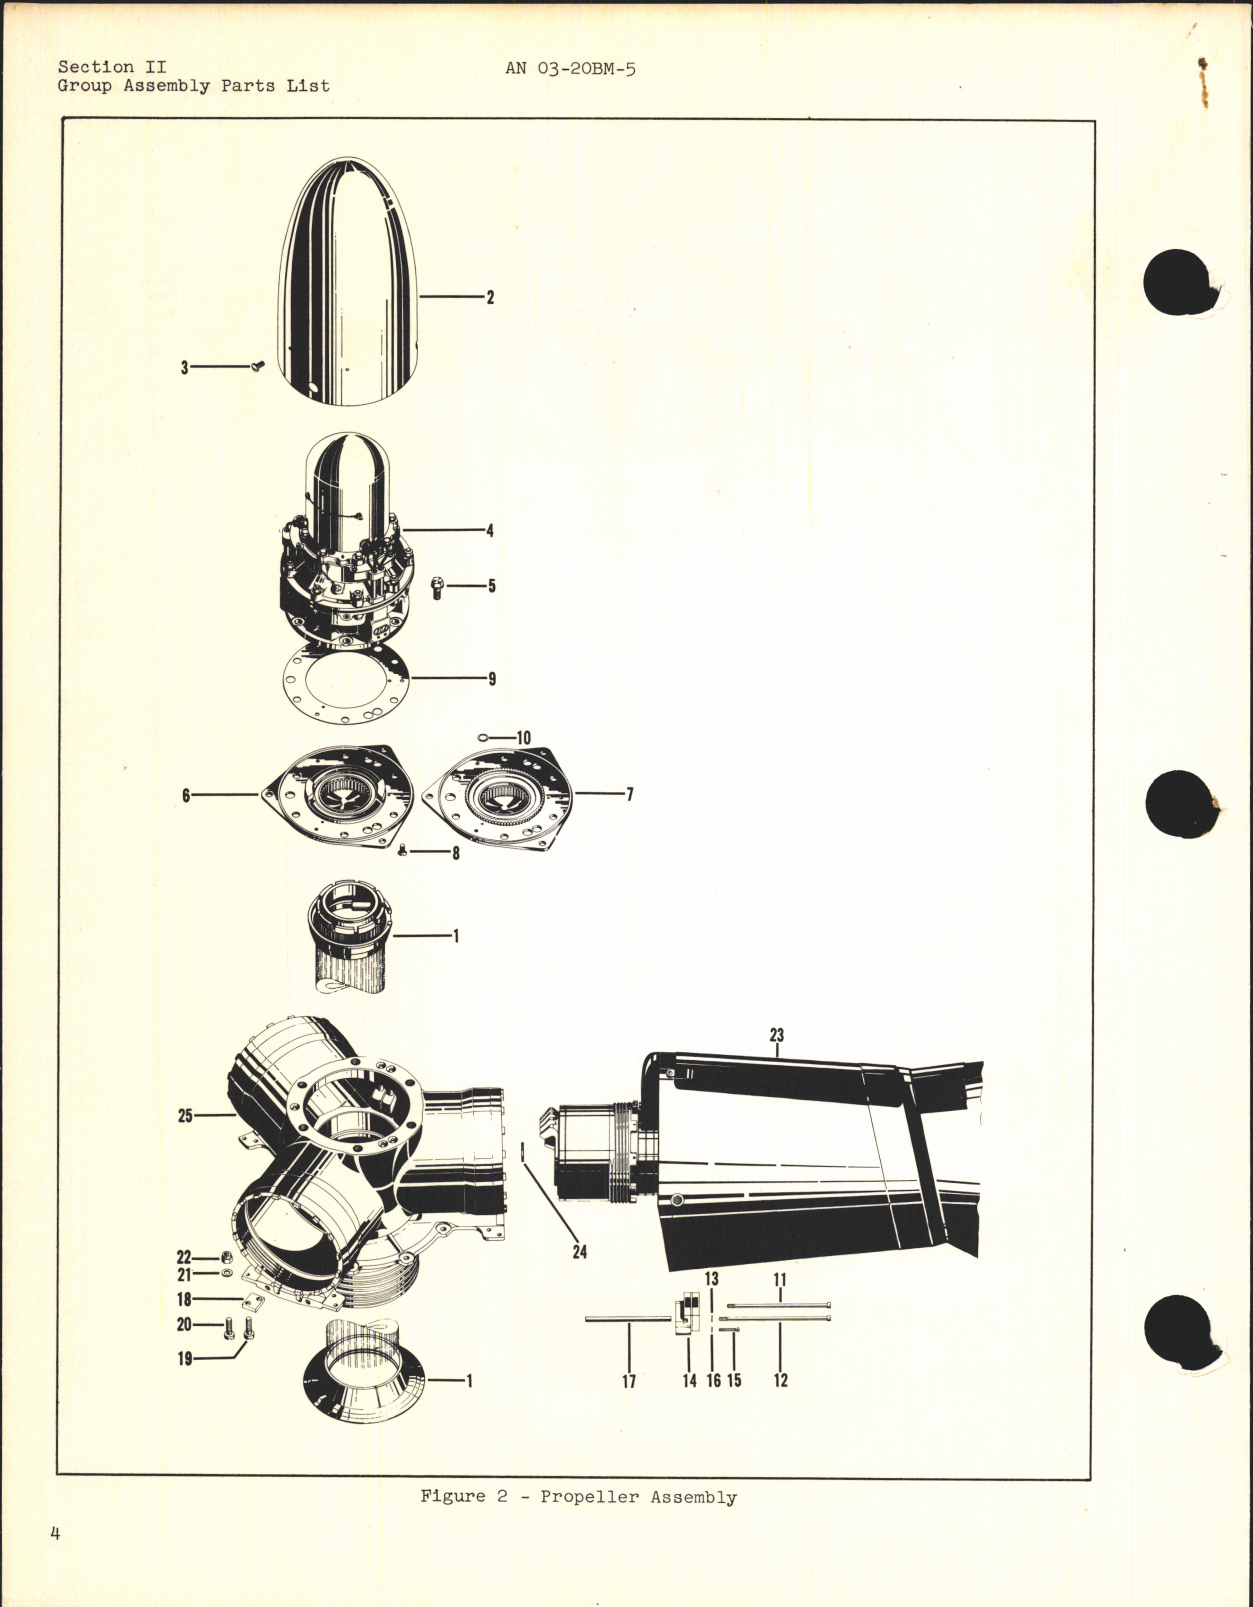 Sample page 8 from AirCorps Library document: Parts Catalog for Electric Propellers Model C634S-C